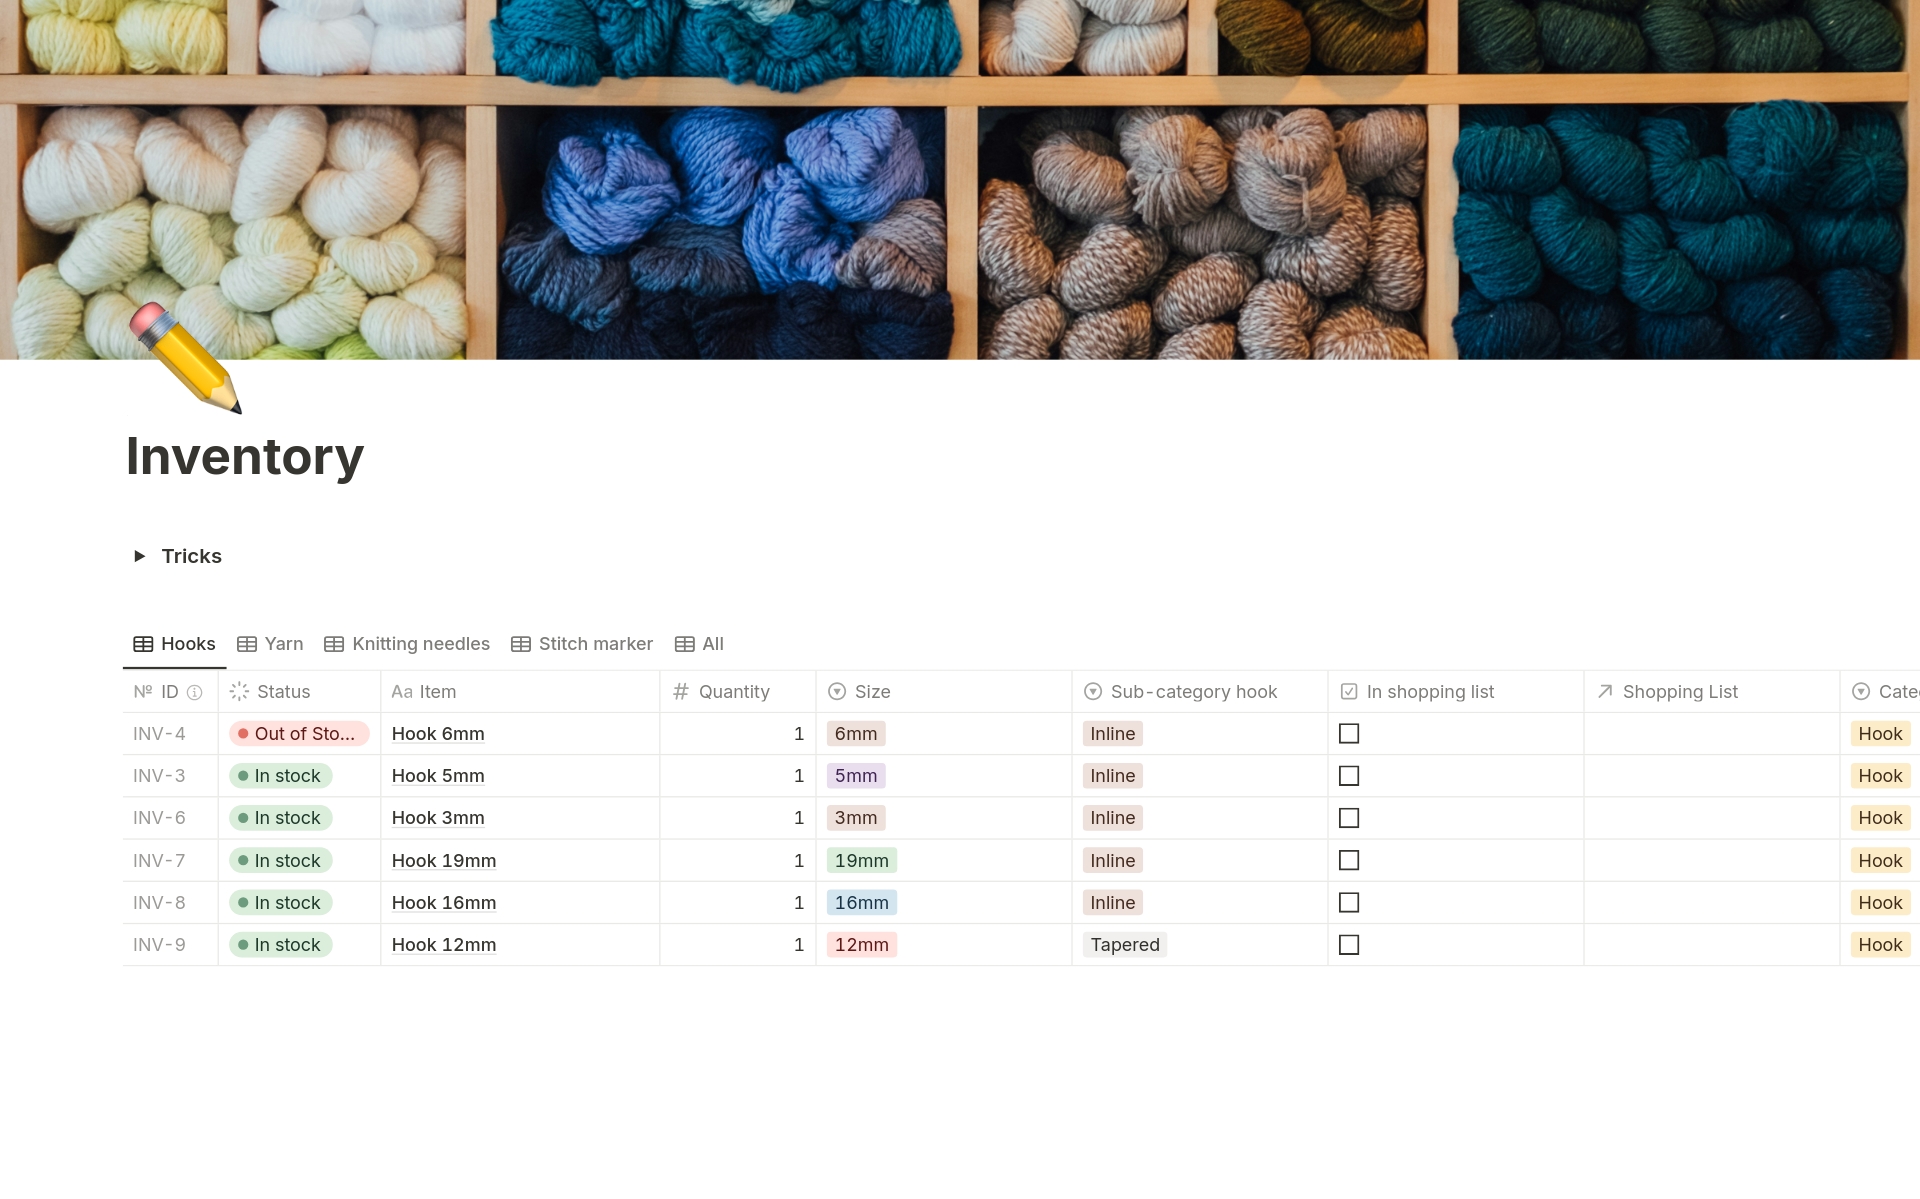 Are you looking to get to the next level of Crochet or Knitting? 

Or are you just looking for a way to organize all your projects and resources in one place?

🧶 Welcome to our Crochet and Knitting Hub Notion Template! 🧵